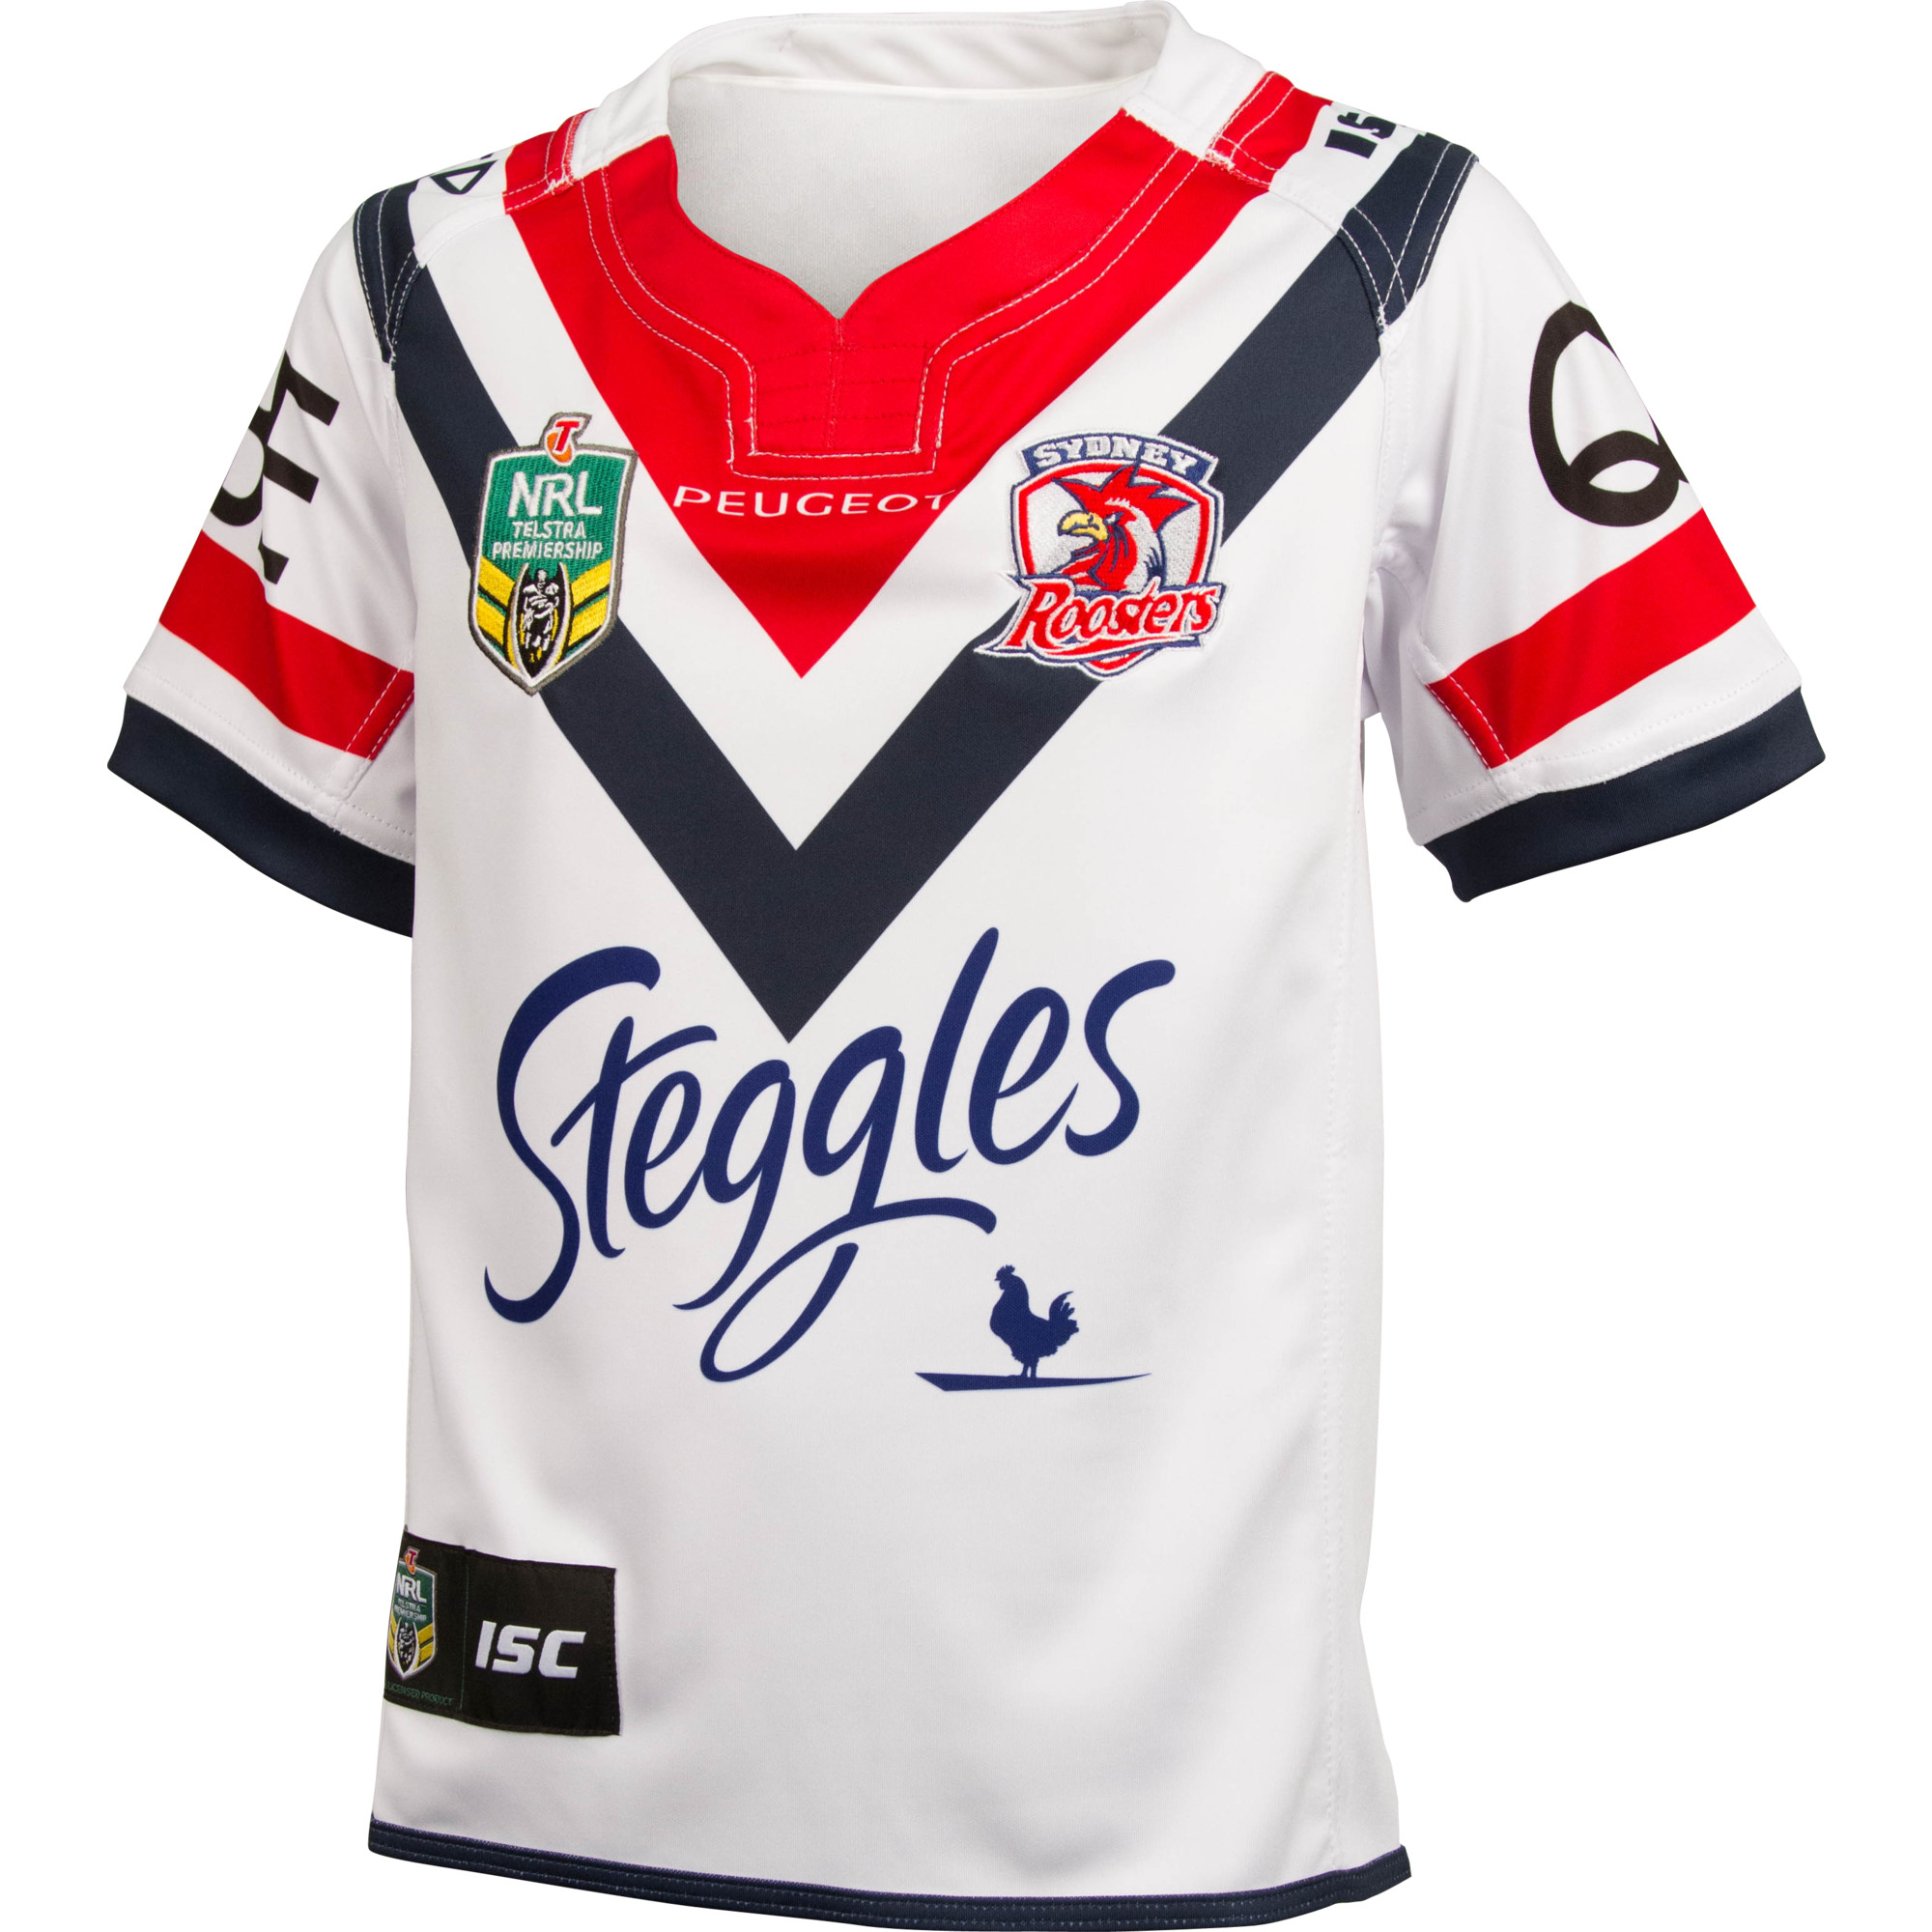 2000x2000 > Sydney Roosters Wallpapers